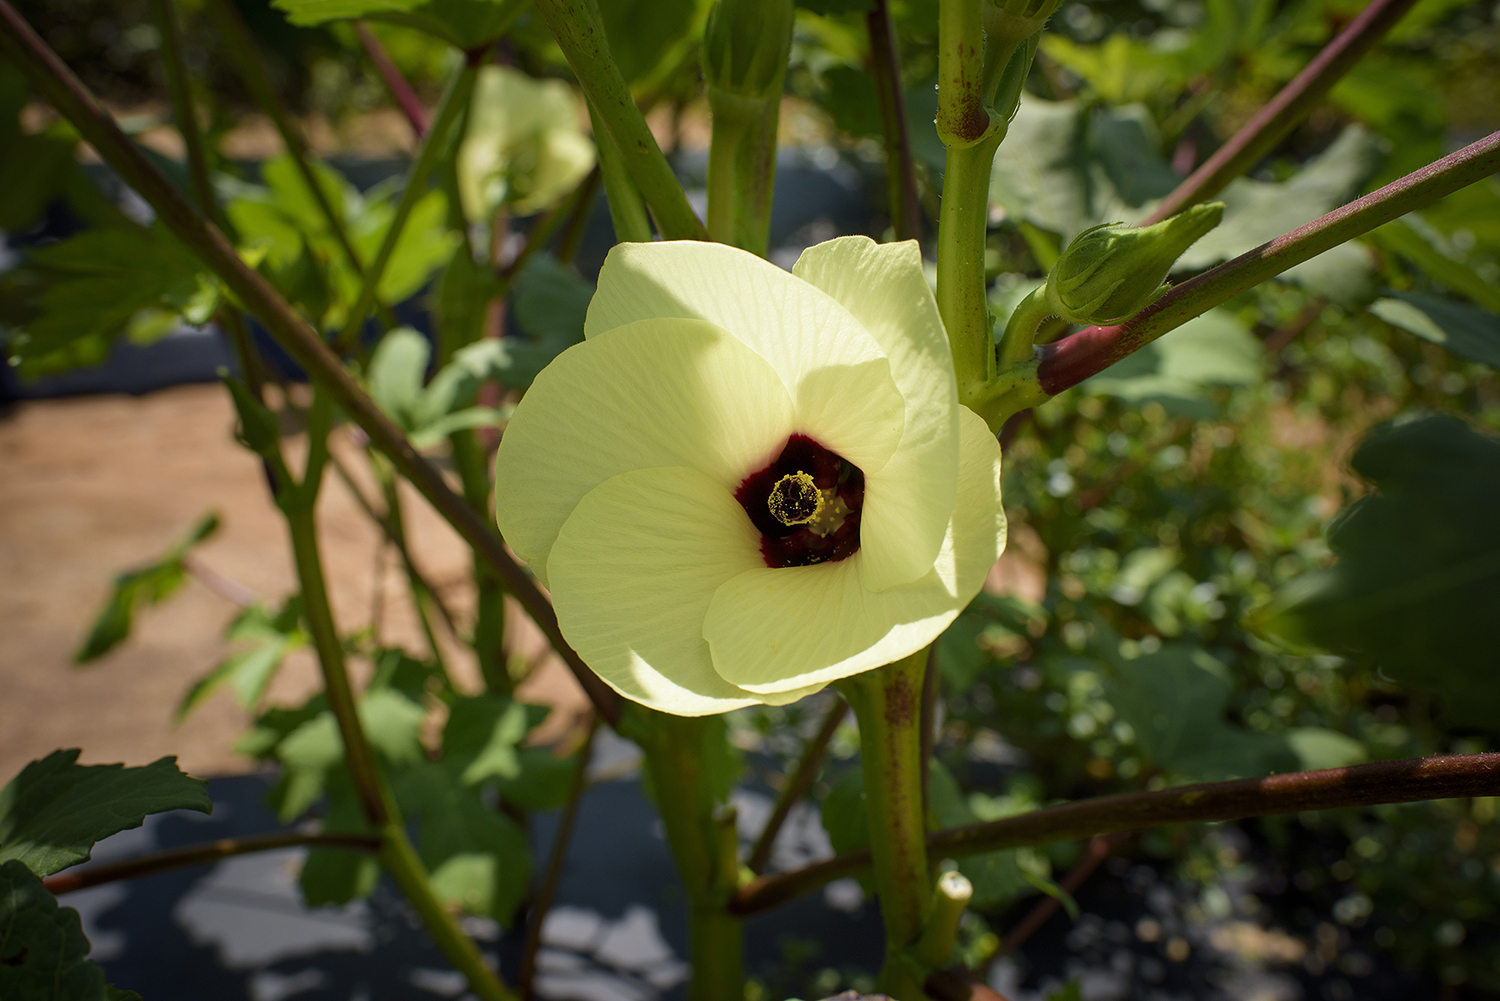 A close up of an okra plant blooming.